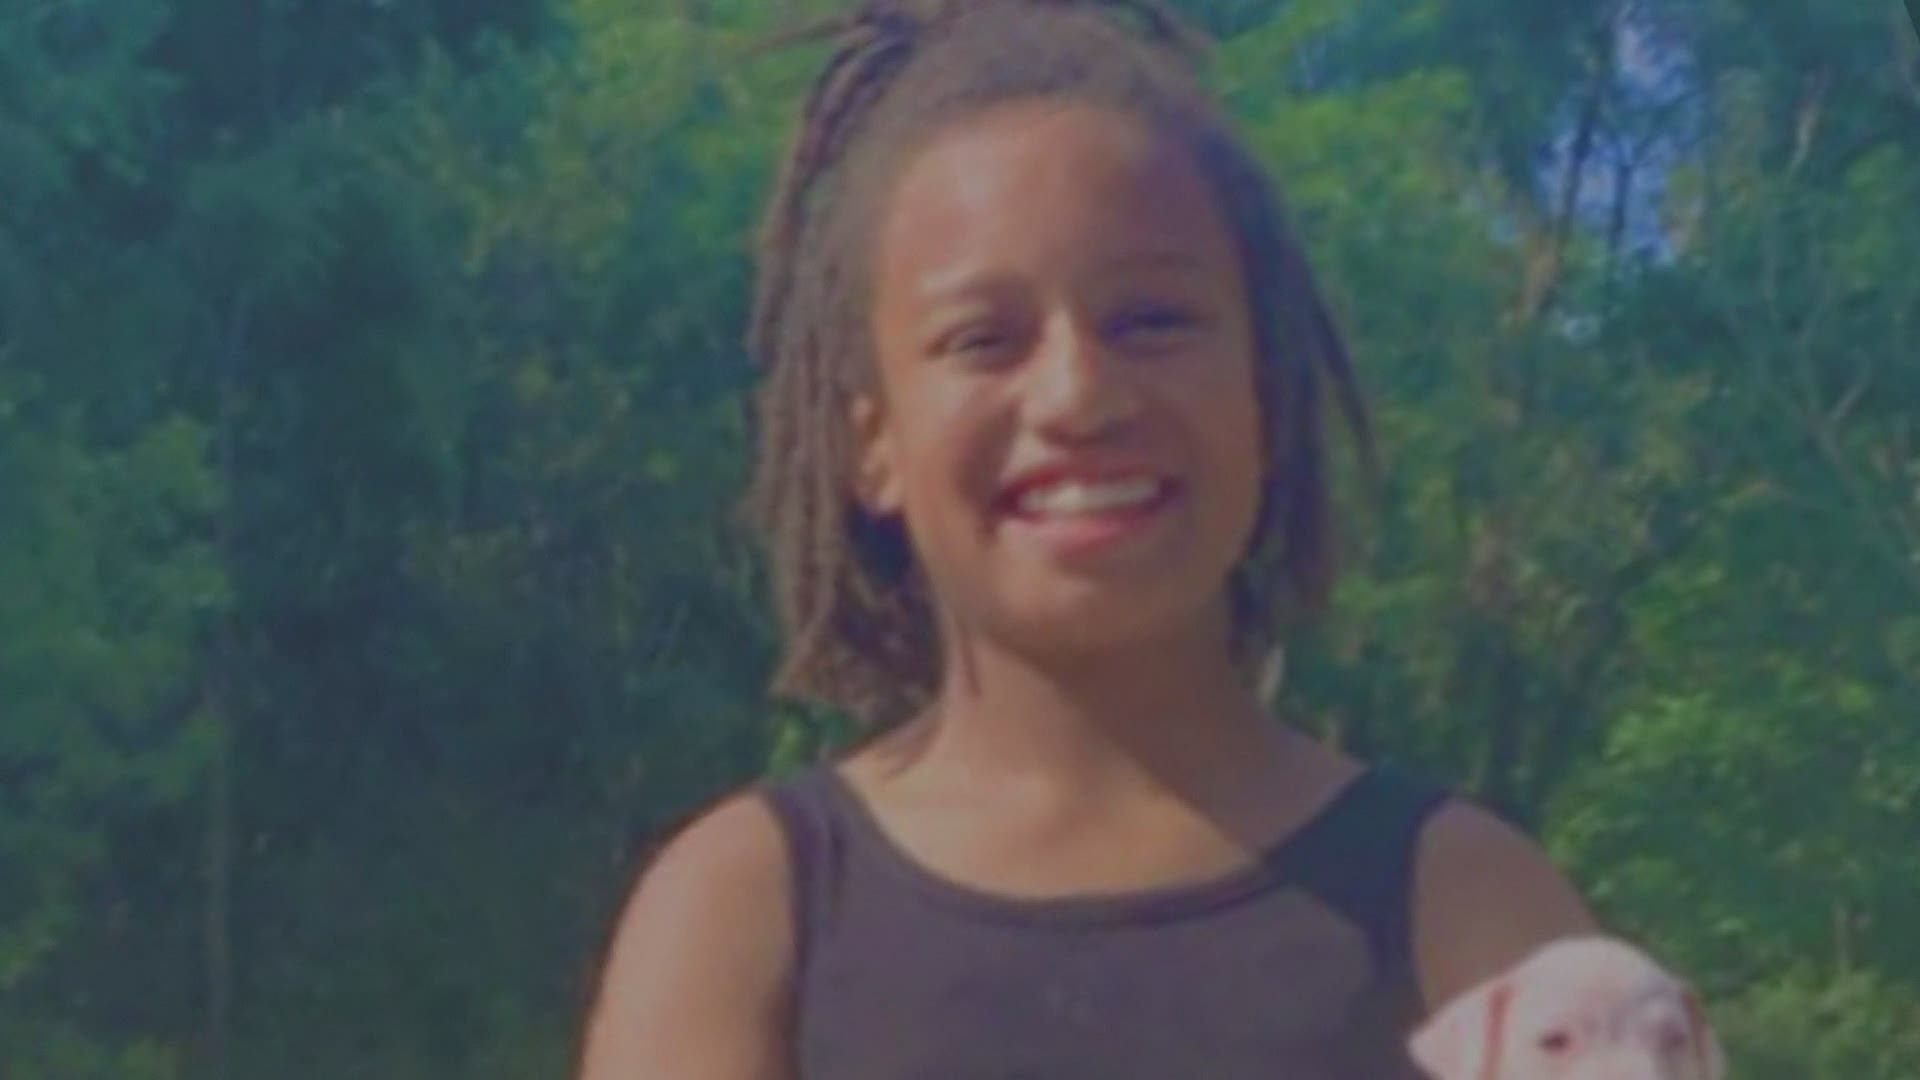 It's been almost eight months since anyone has seen 11-year-old Breasia Terrell, the missing Davenport girl who loves basketball, Tik Tok and her family